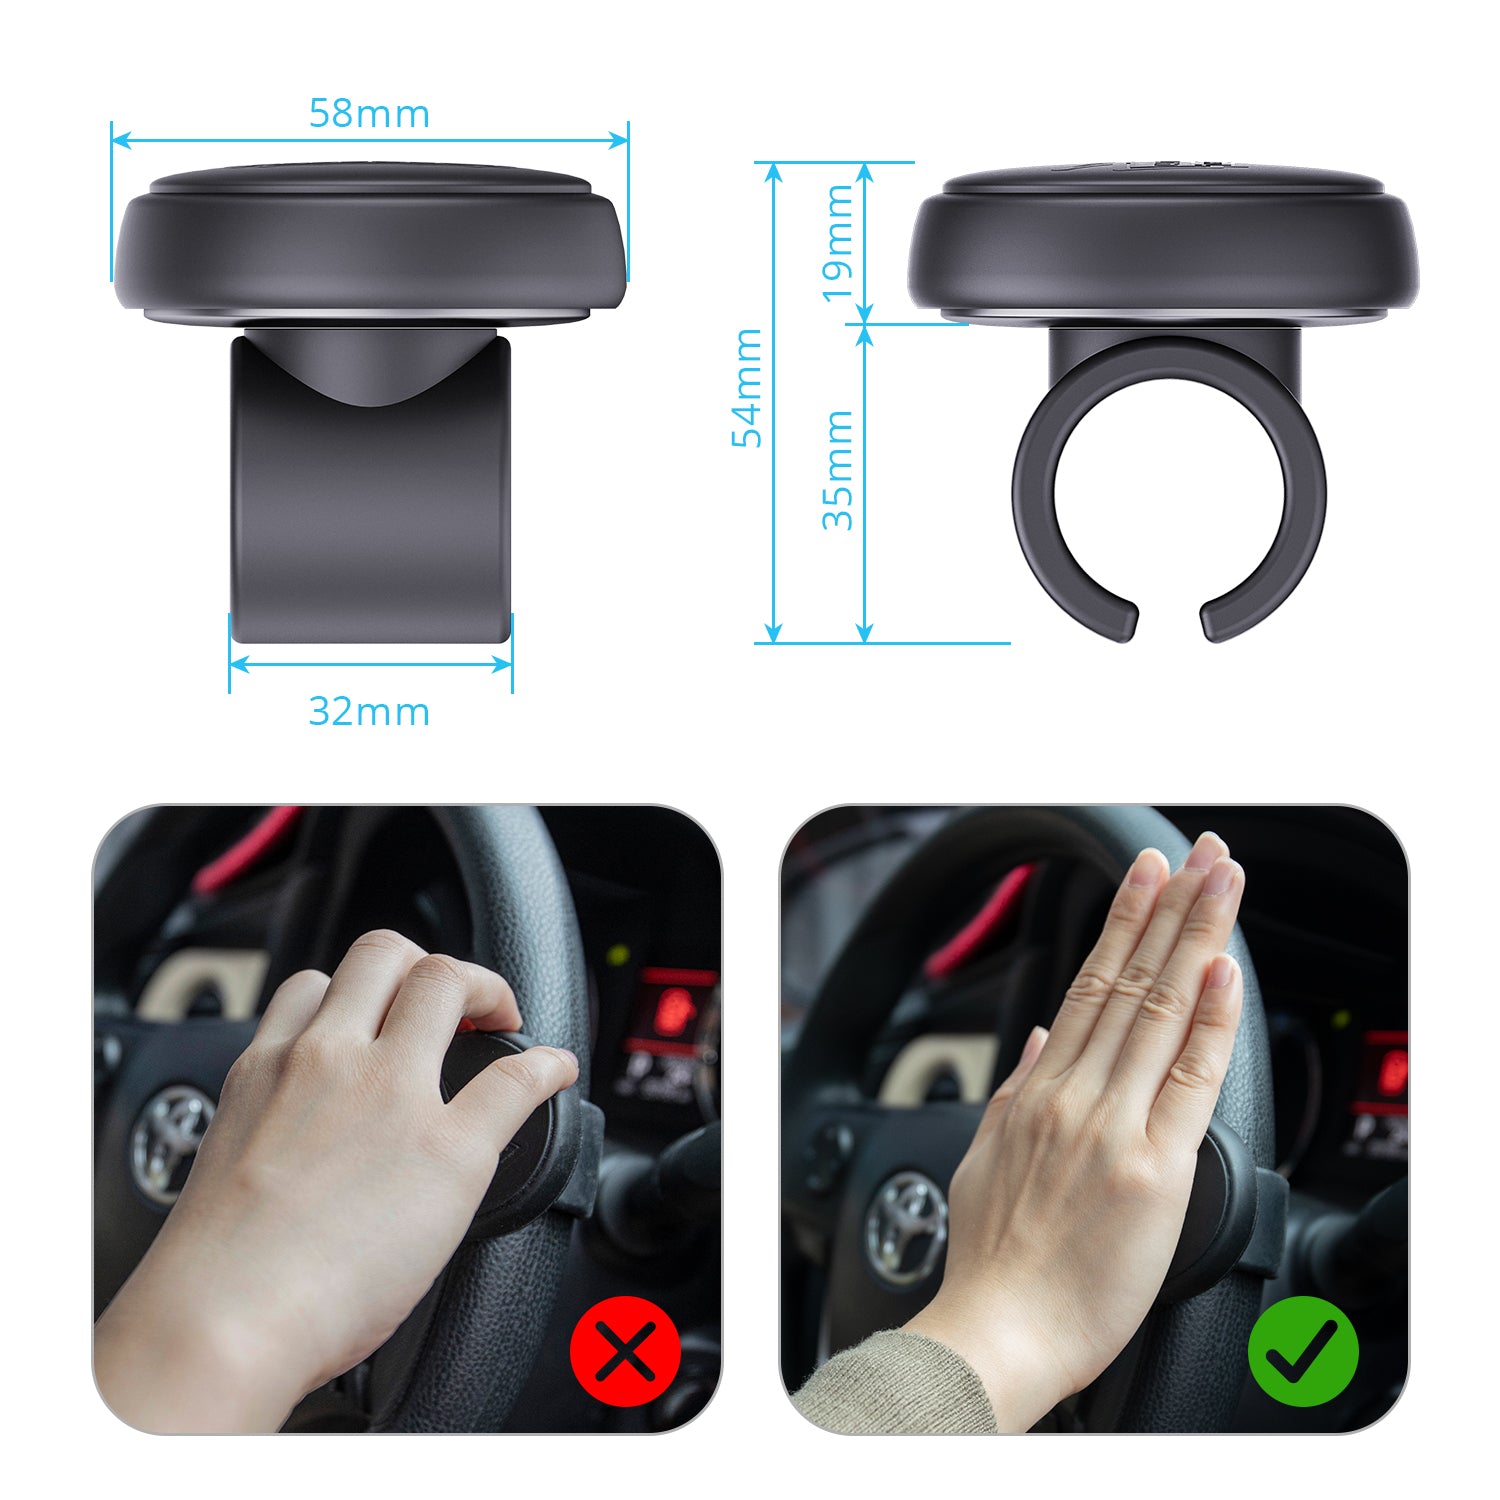 AutoMuko Steering Wheel Spinner, Silicone Power Handle, steering wheel knob, Easy installation No tools required (Black)